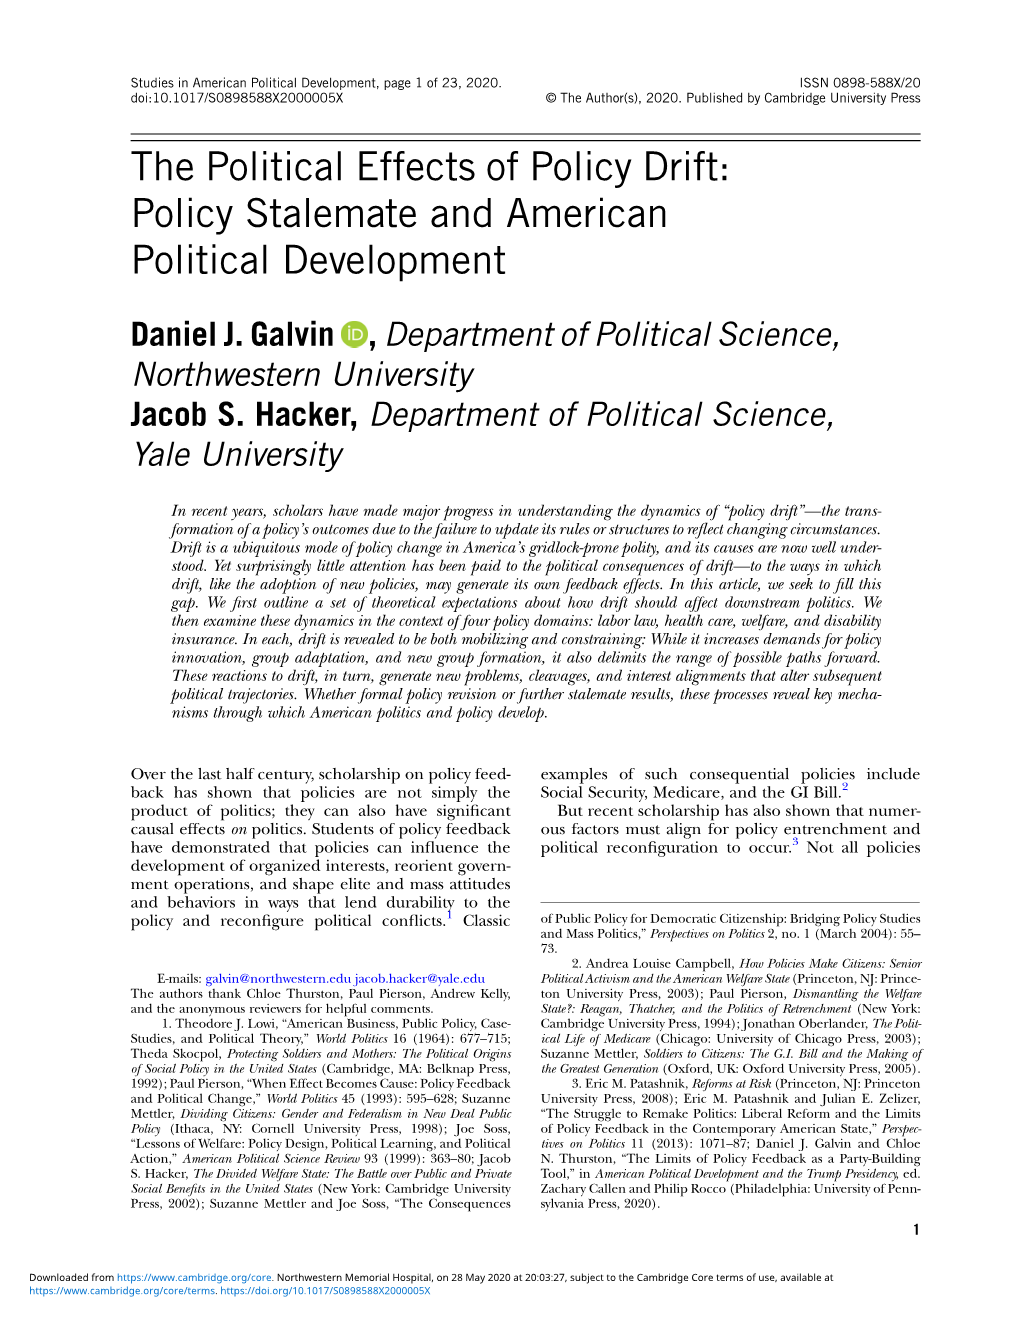 The Political Effects of Policy Drift: Policy Stalemate and American Political Development